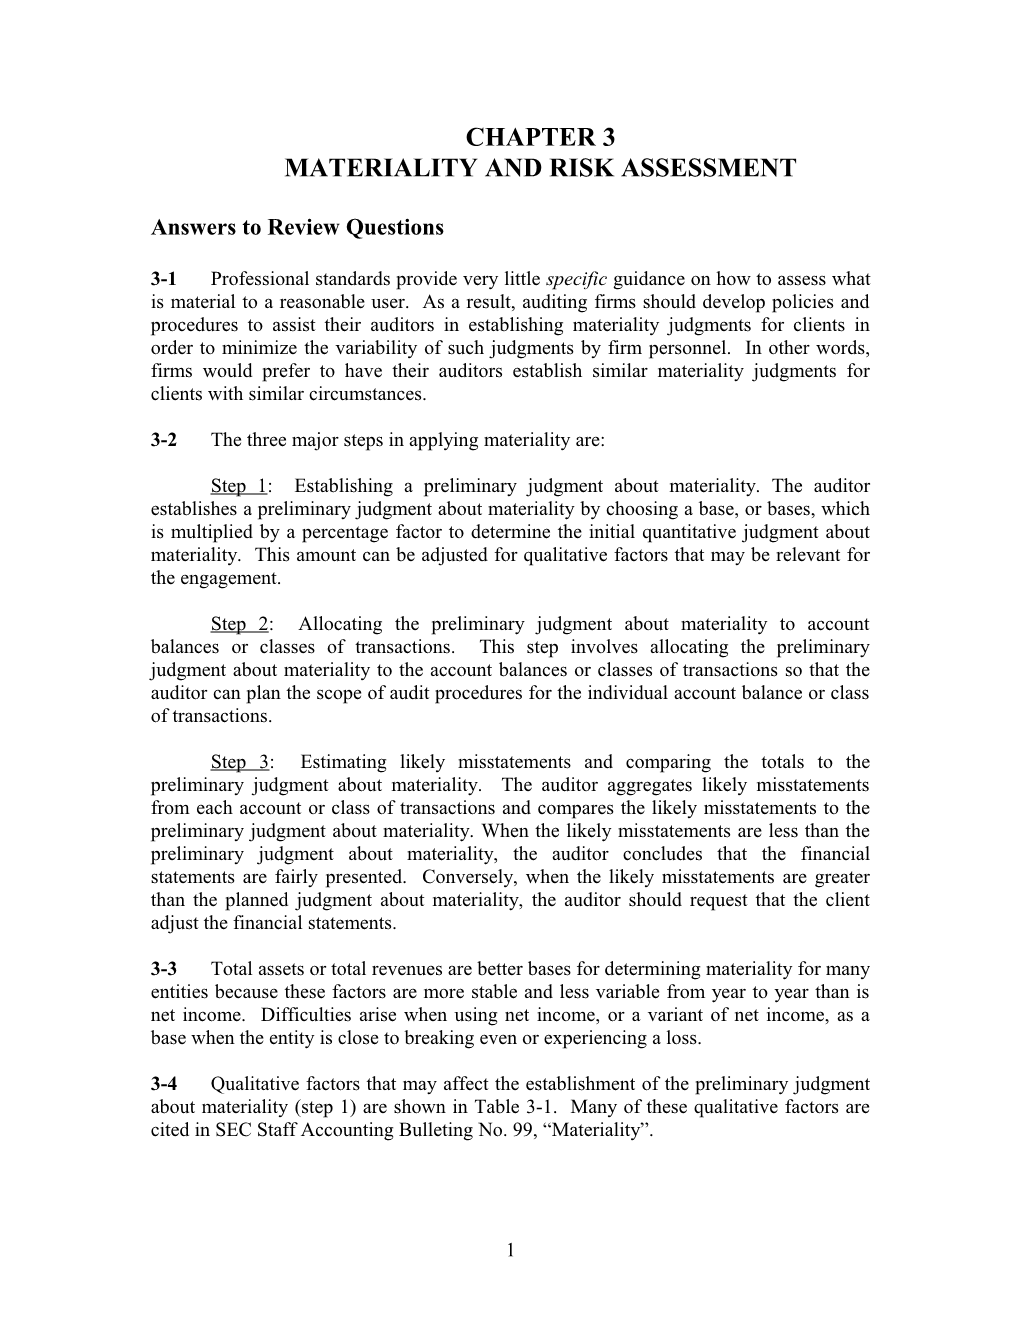 Materiality and Risk Assessment